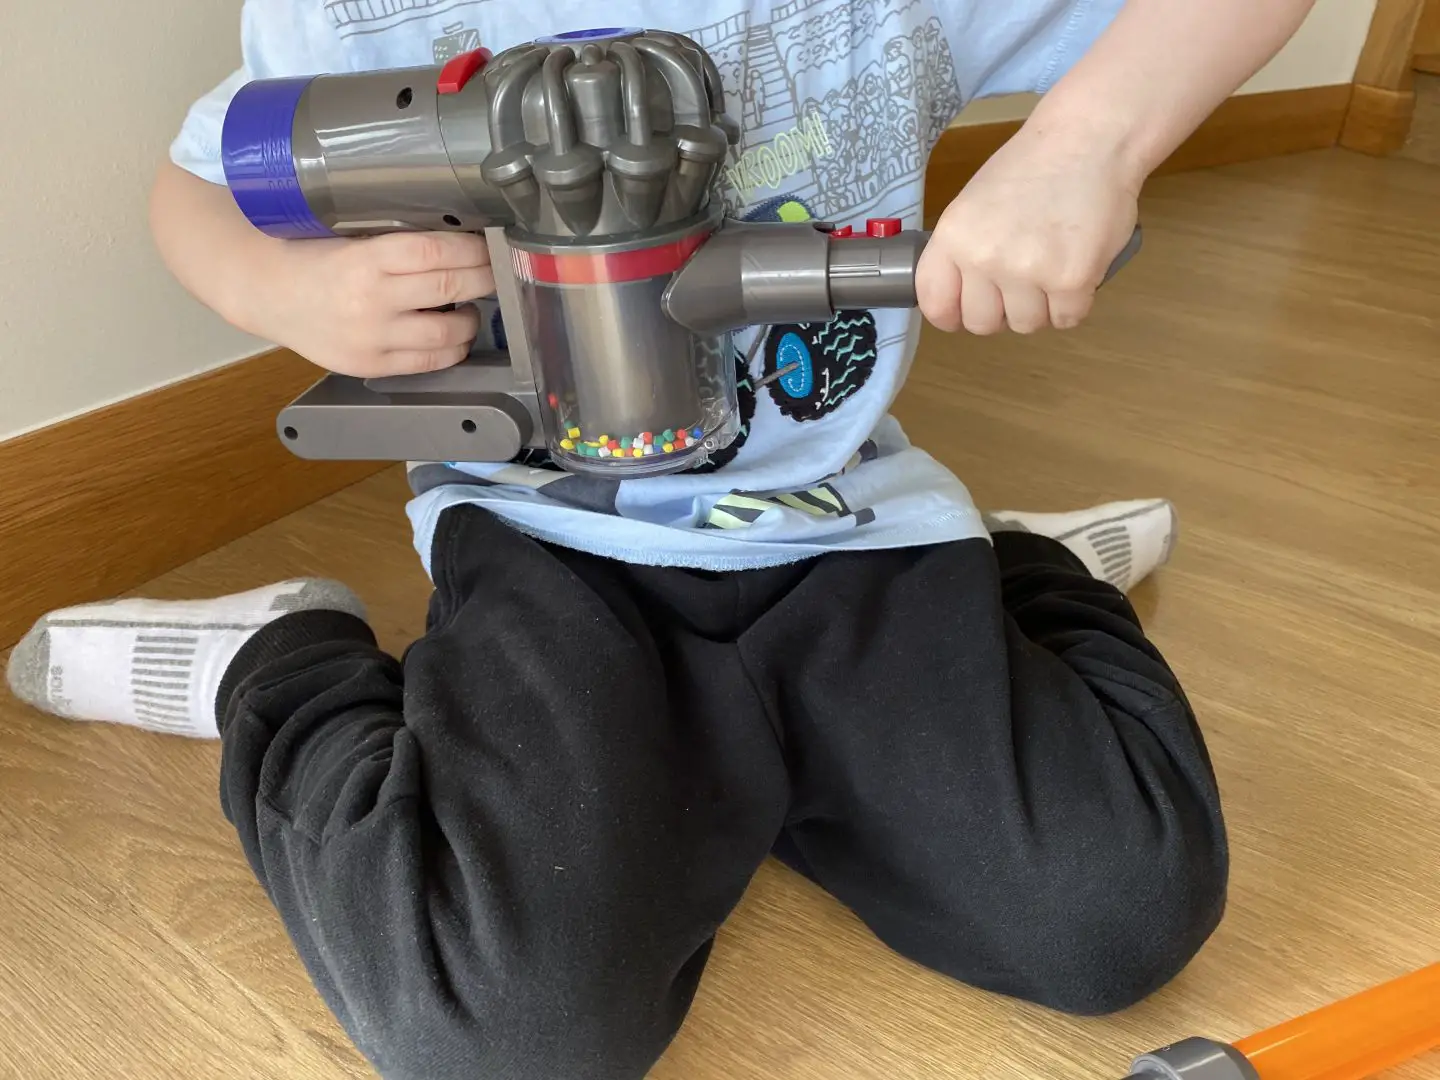 A boy playing with a toy vacuum cleaner